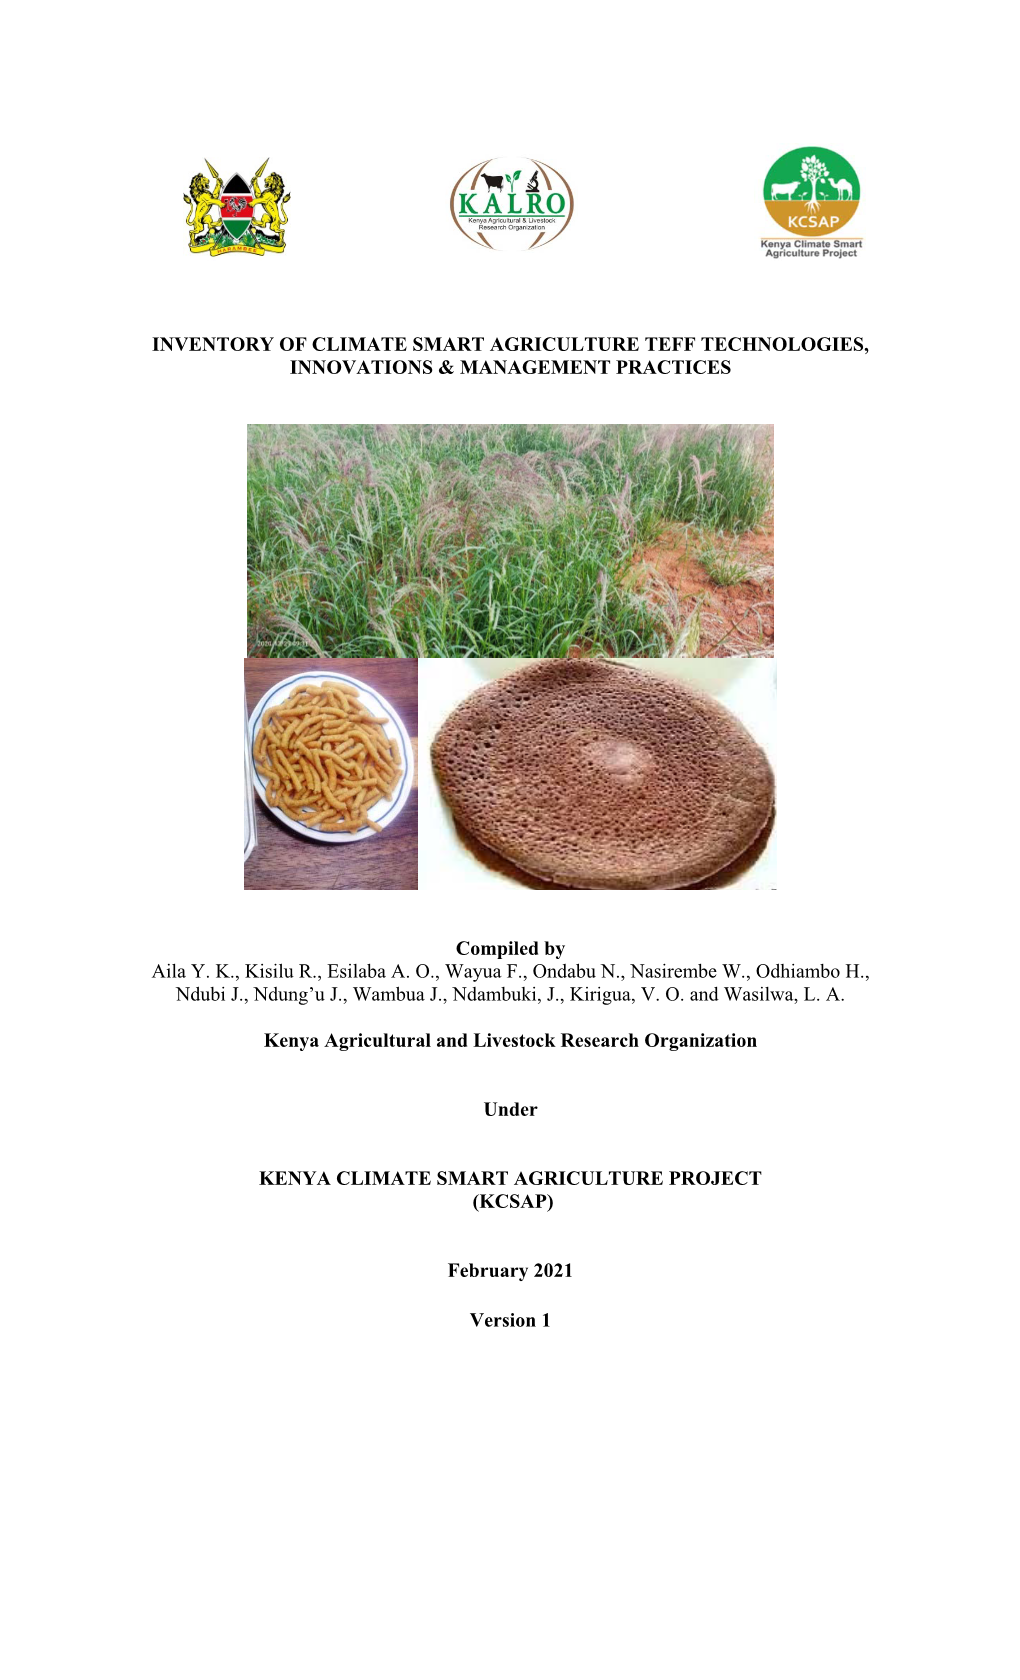 INVENTORY of CLIMATE SMART AGRICULTURE TEFF TECHNOLOGIES, INNOVATIONS & MANAGEMENT PRACTICES Compiled by Aila Y. K., Kisilu